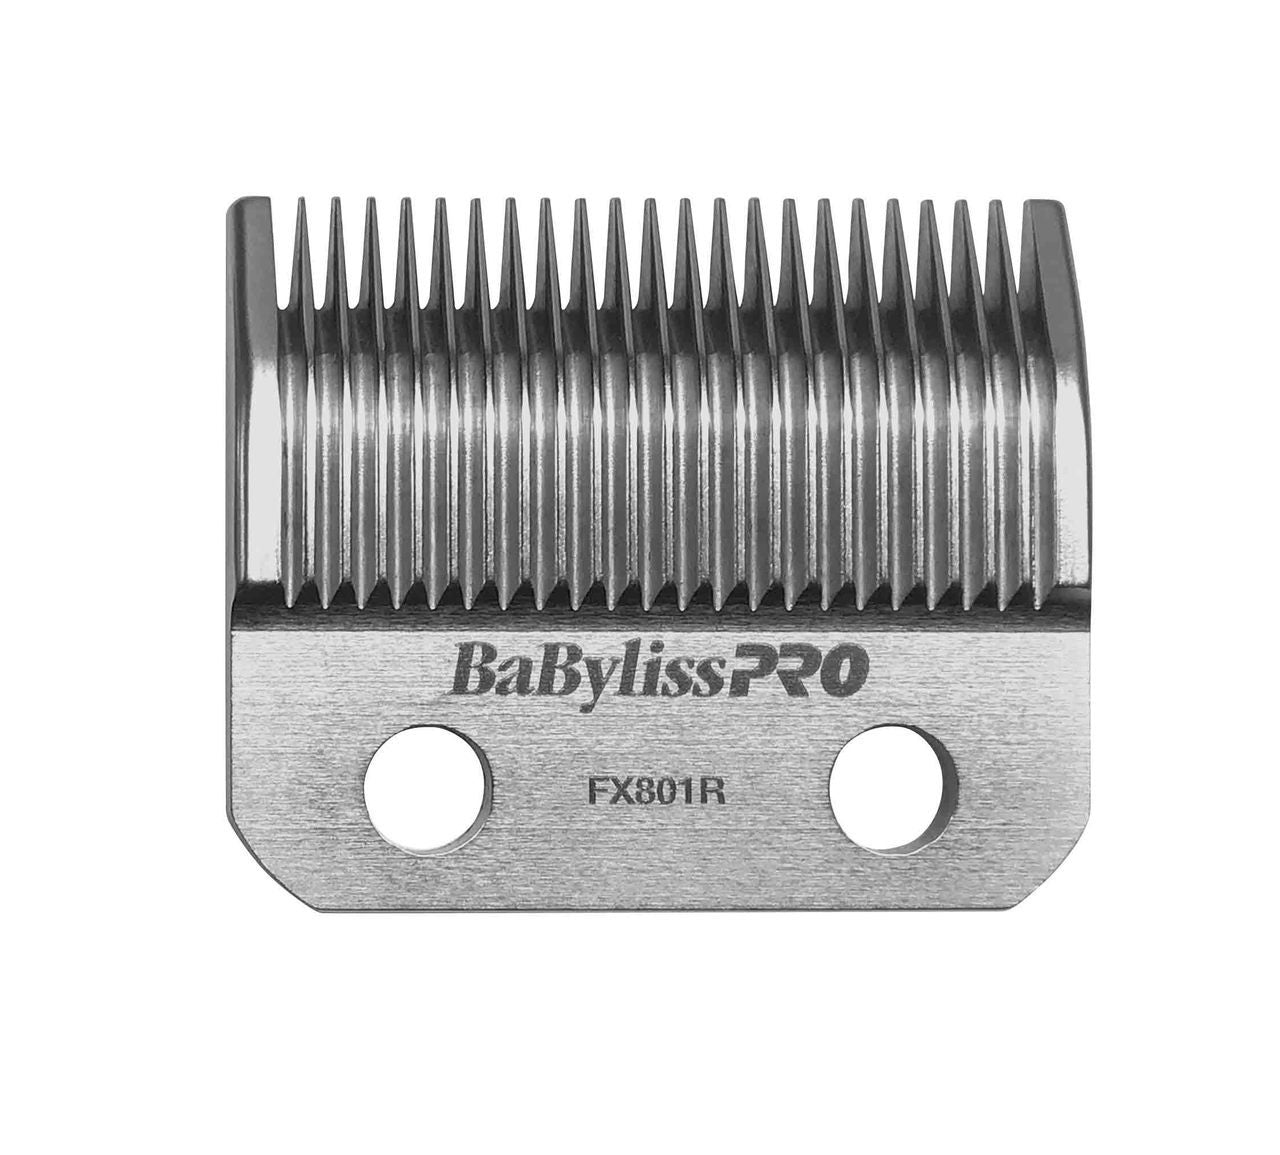 BaByliss Replacement Blade FX801R